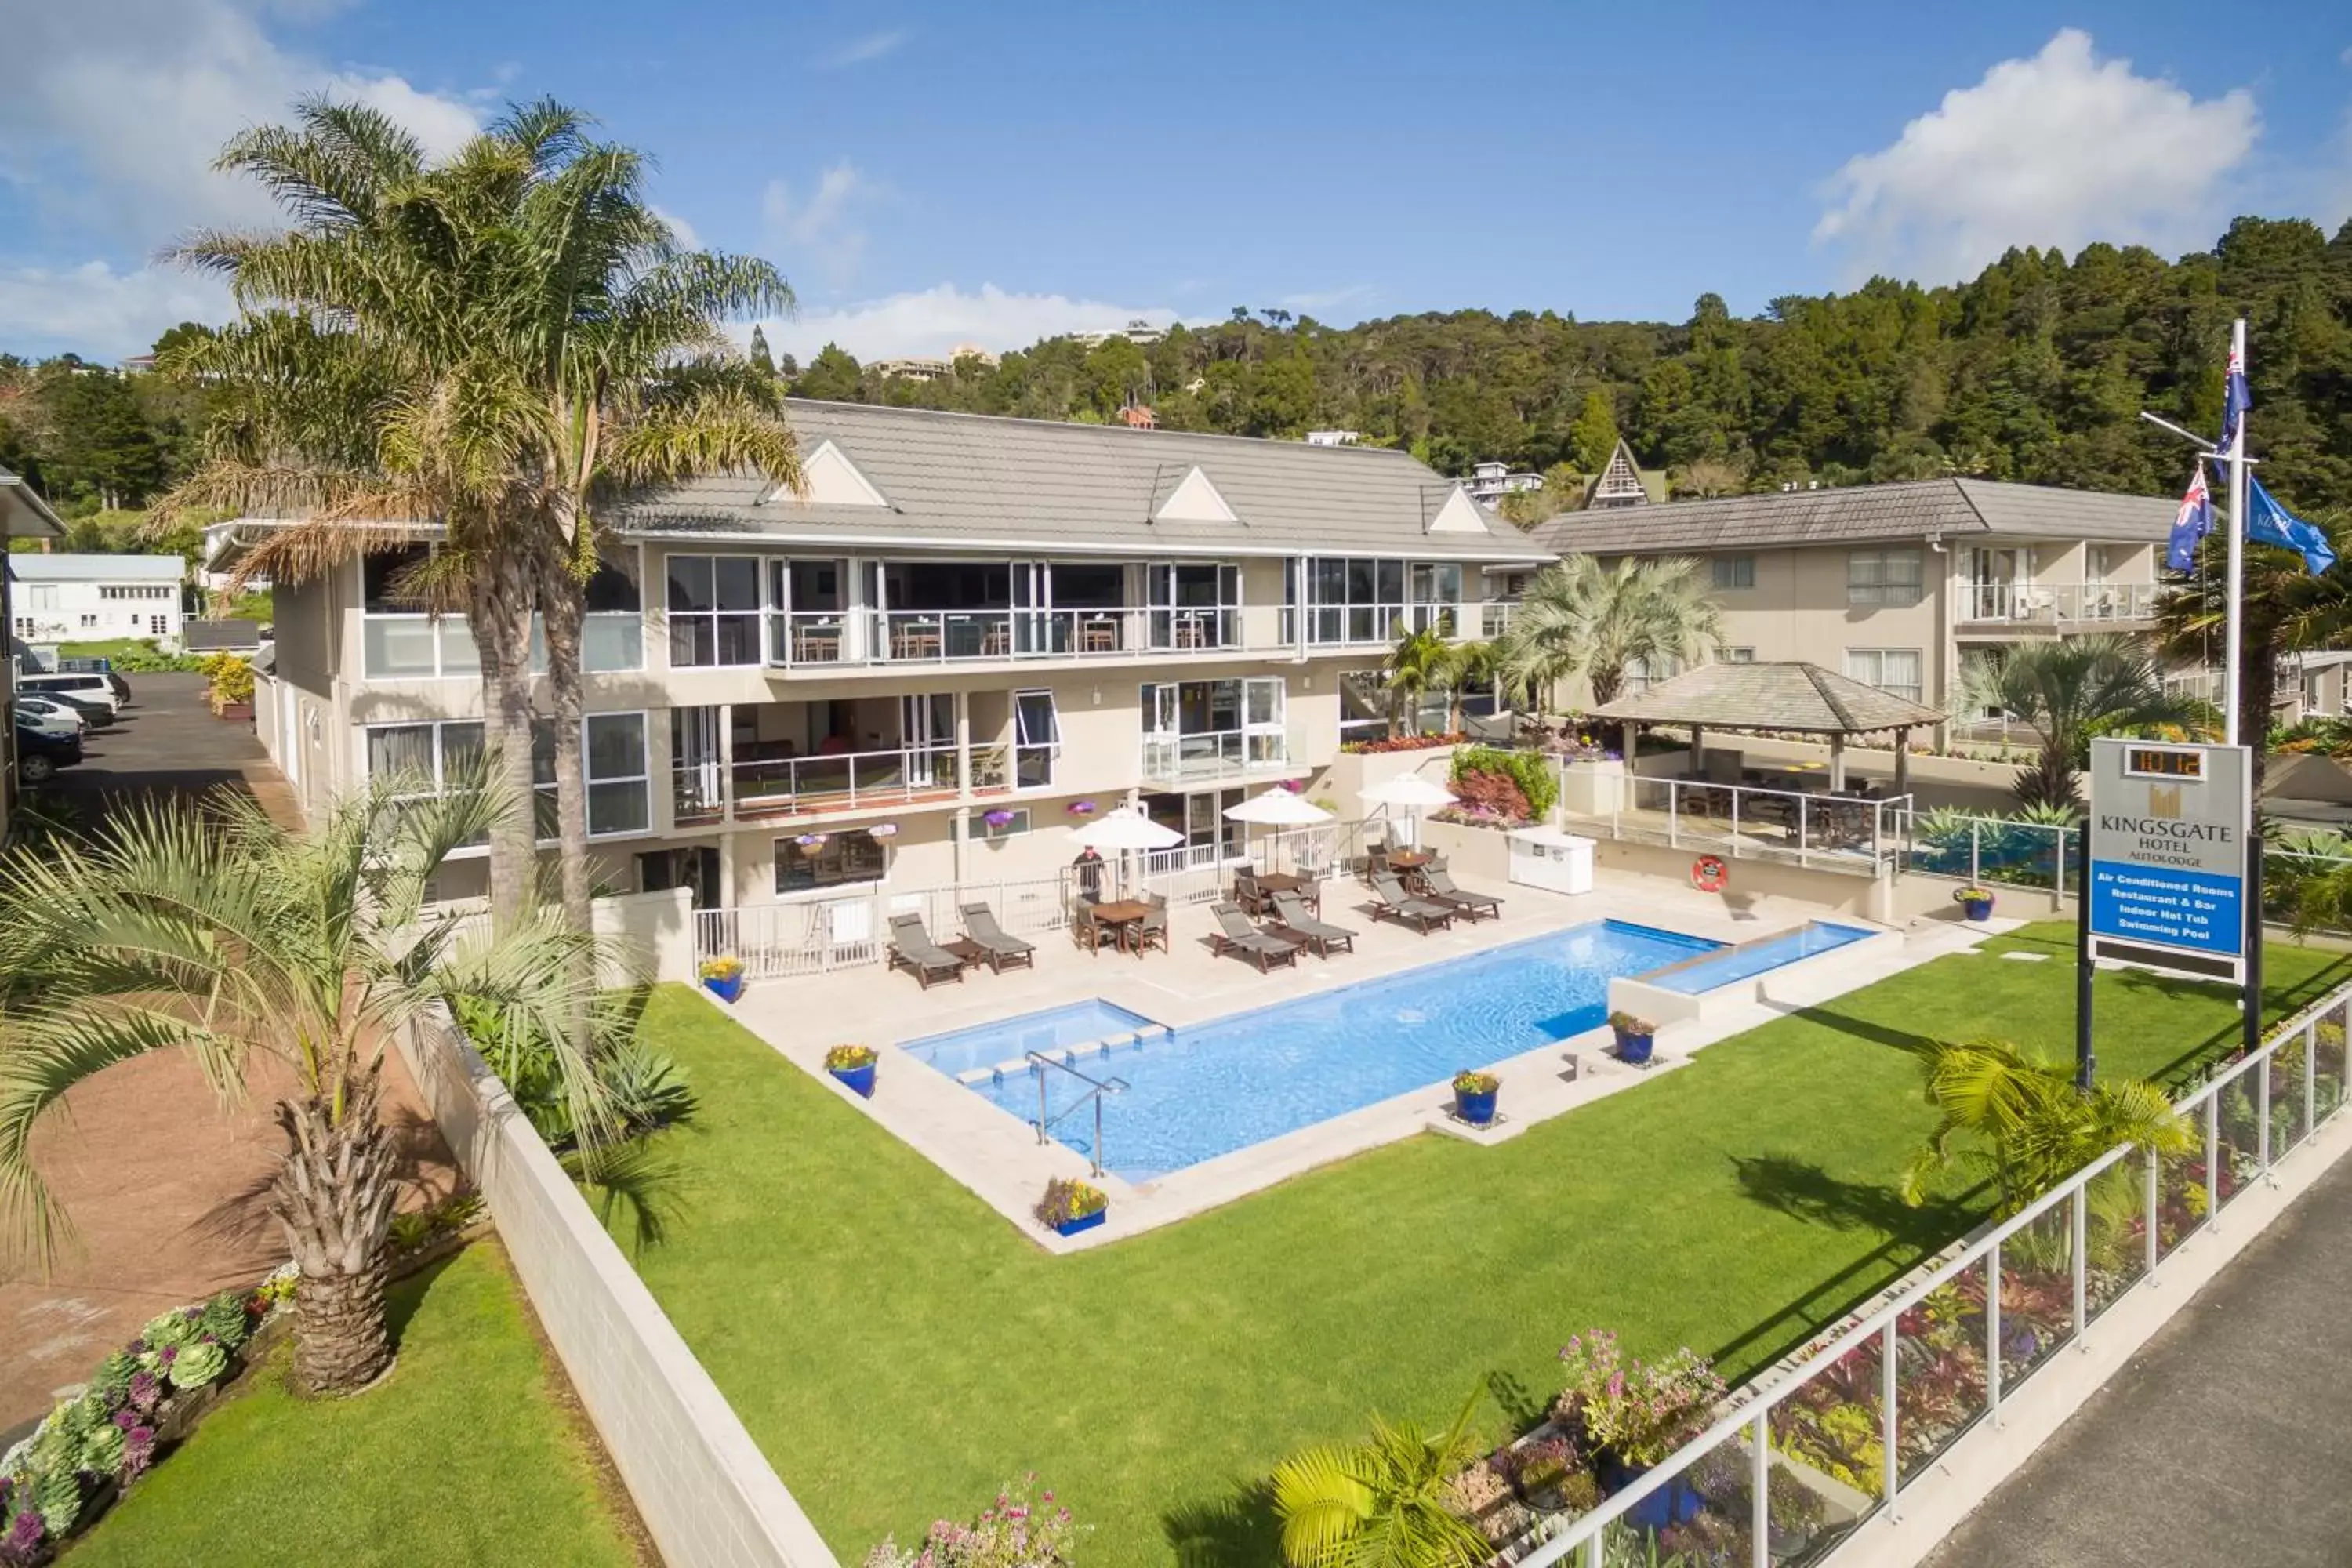 Property building, Pool View in Kingsgate Hotel Autolodge Paihia